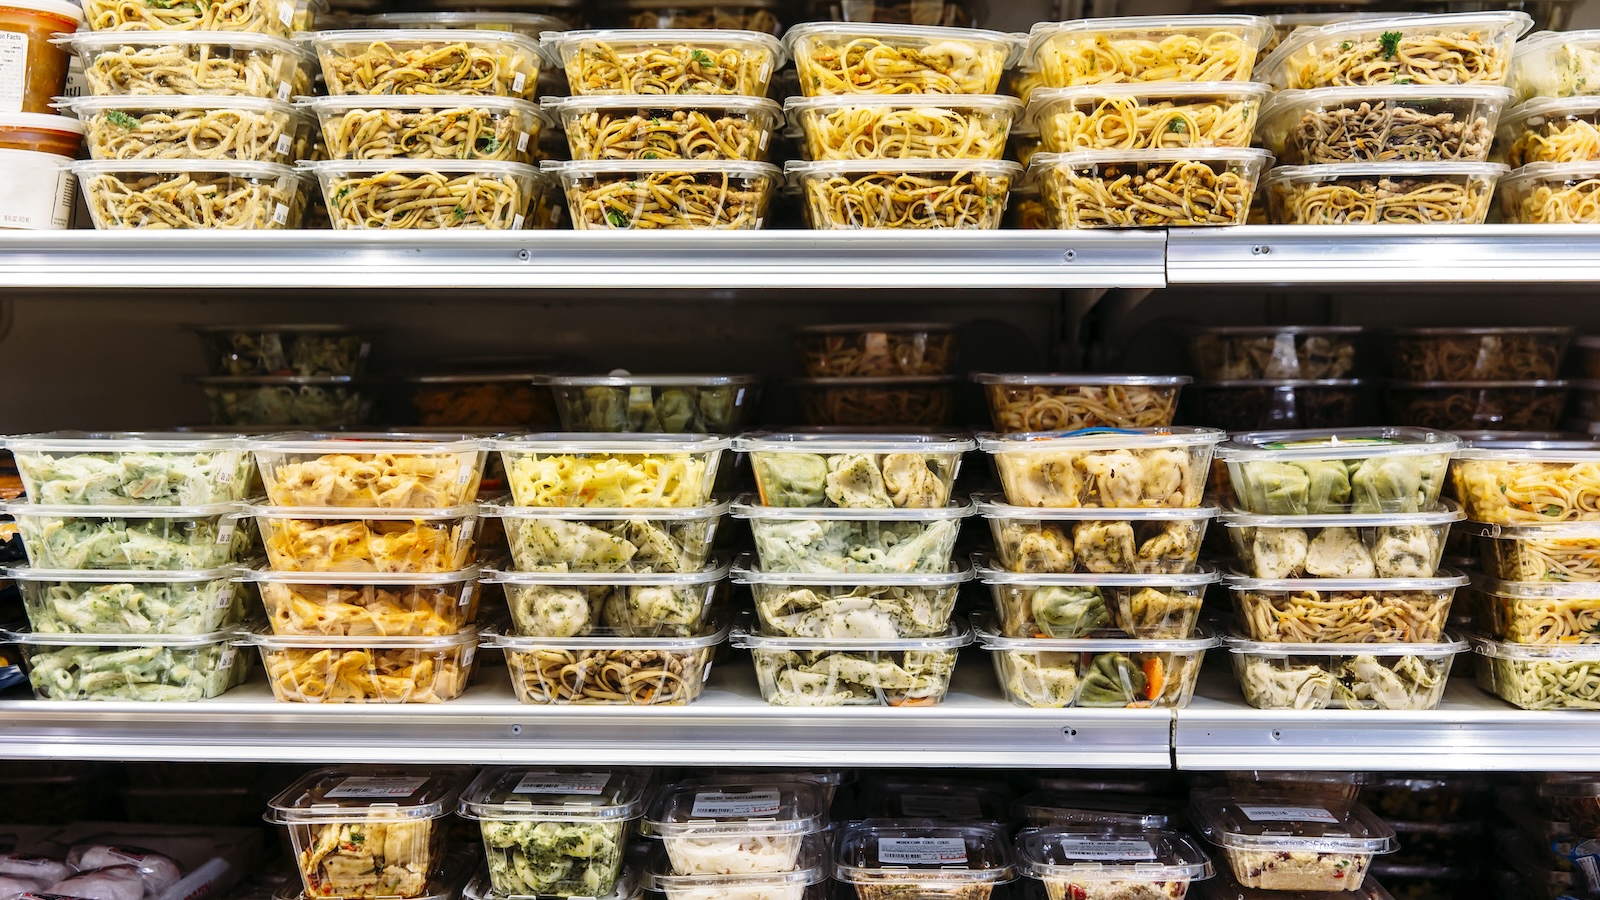 Plastic containers of prepared salad are stocked on three grocery store shelves.